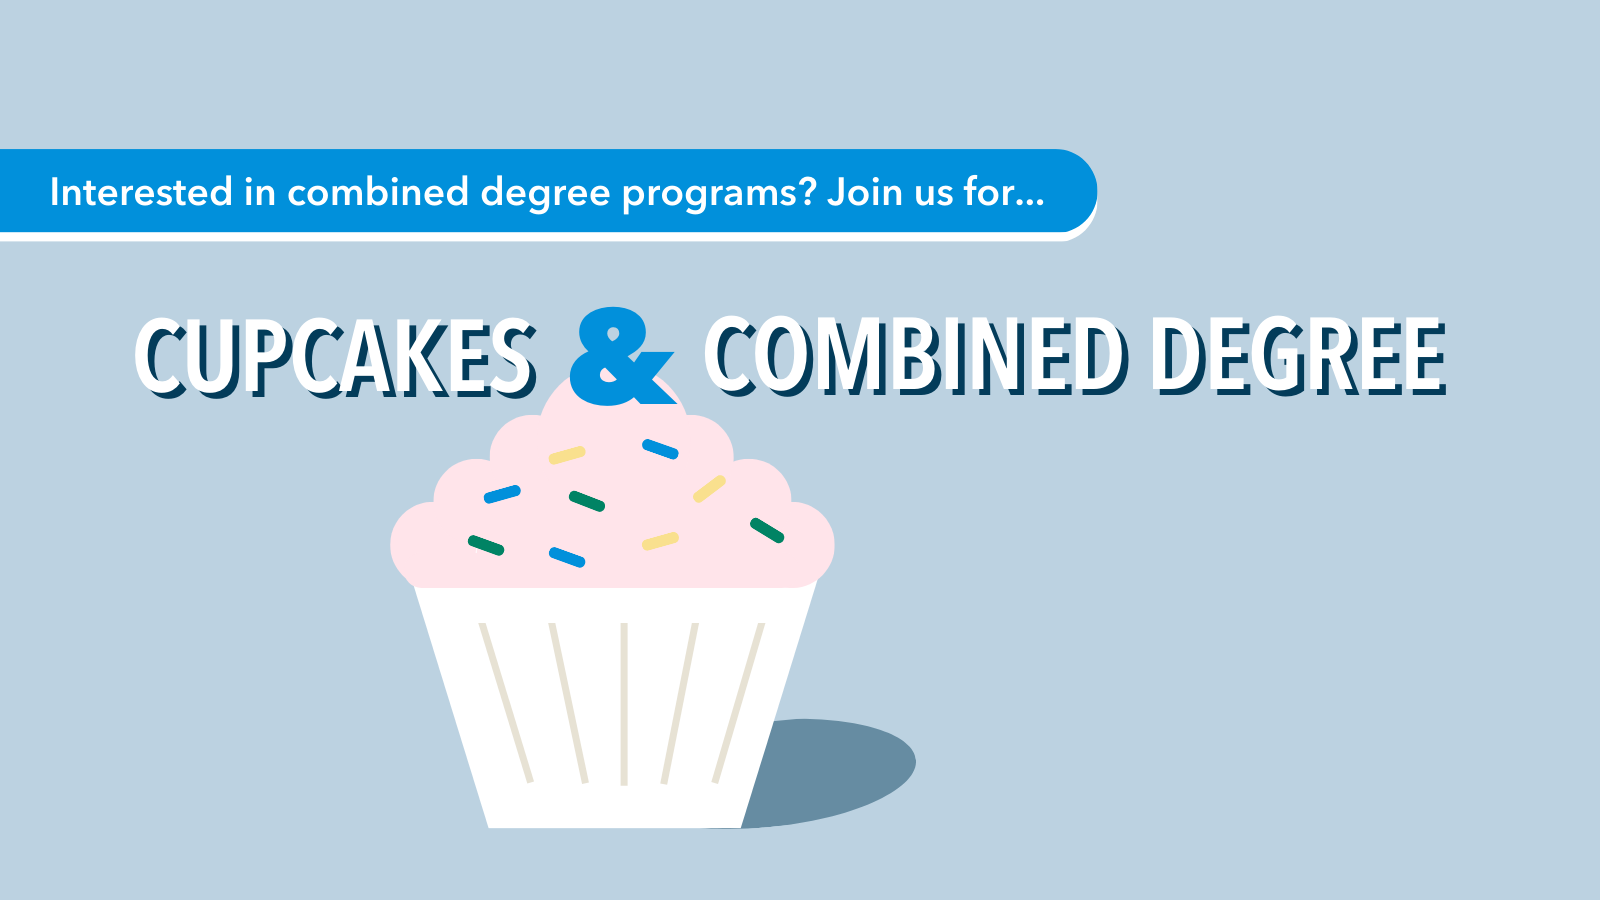 Cupcakes & Combined Degree